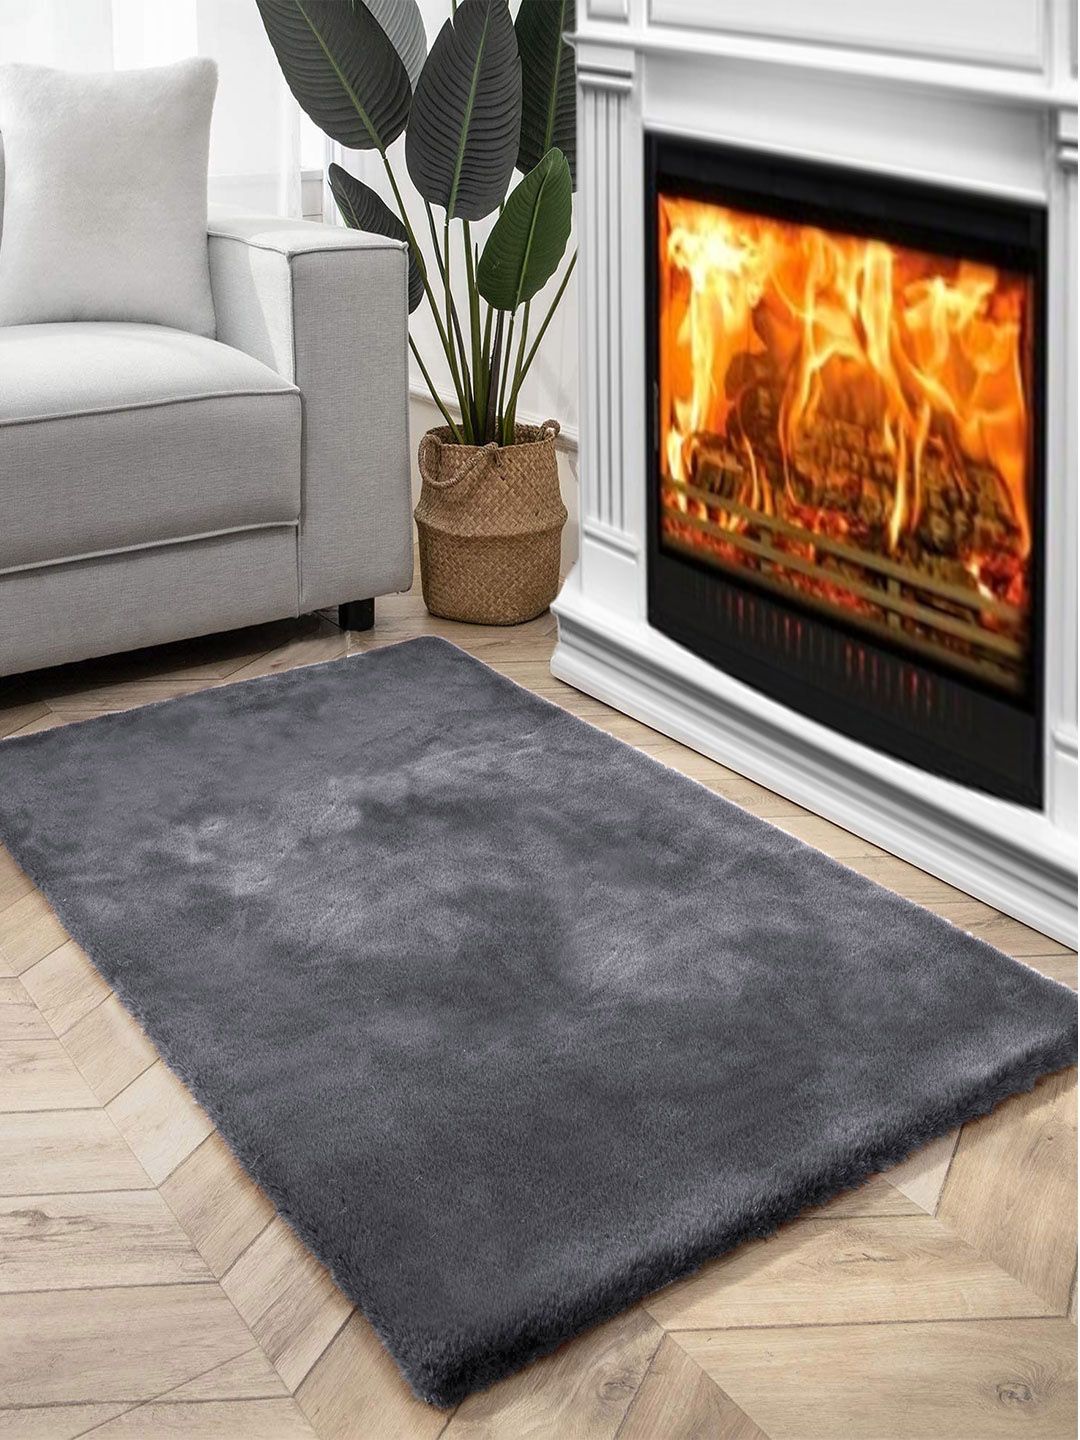 FI Grey Polycotton Solid Bath Rugs Price in India